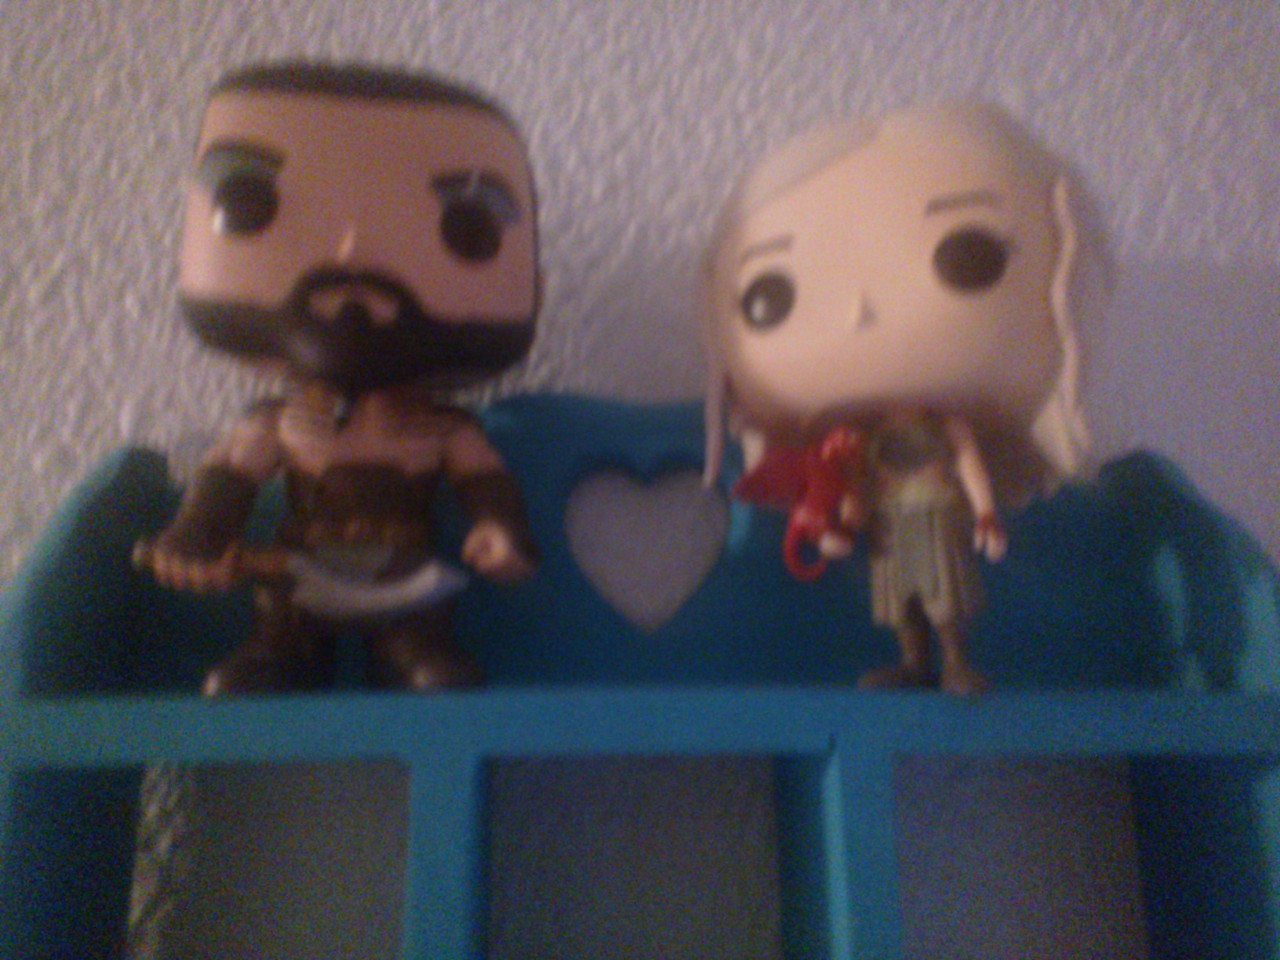 Anyways, here&rsquo;s part of my birthday present. I got the Khal Drogo figure